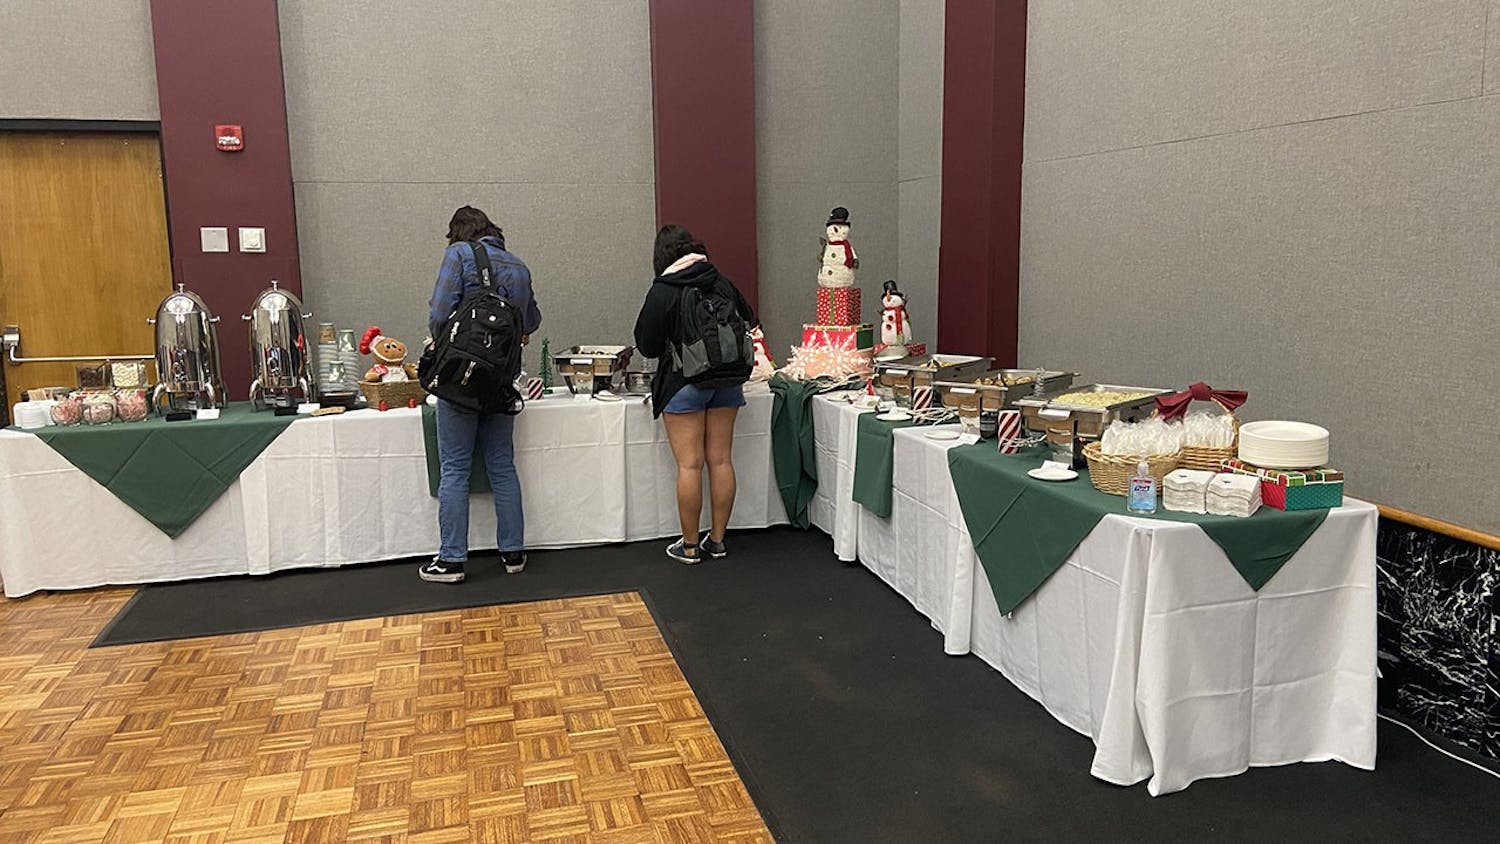 Christmas, Hanukkah and Kwanzaa — Chrismahanukwanzika provides a space for USC students to celebrate the holidays while learning about various cultural identities on campus. The Office of Multicultural Student Affairs hosts Chrismahanukwanzika once a year to educate students.